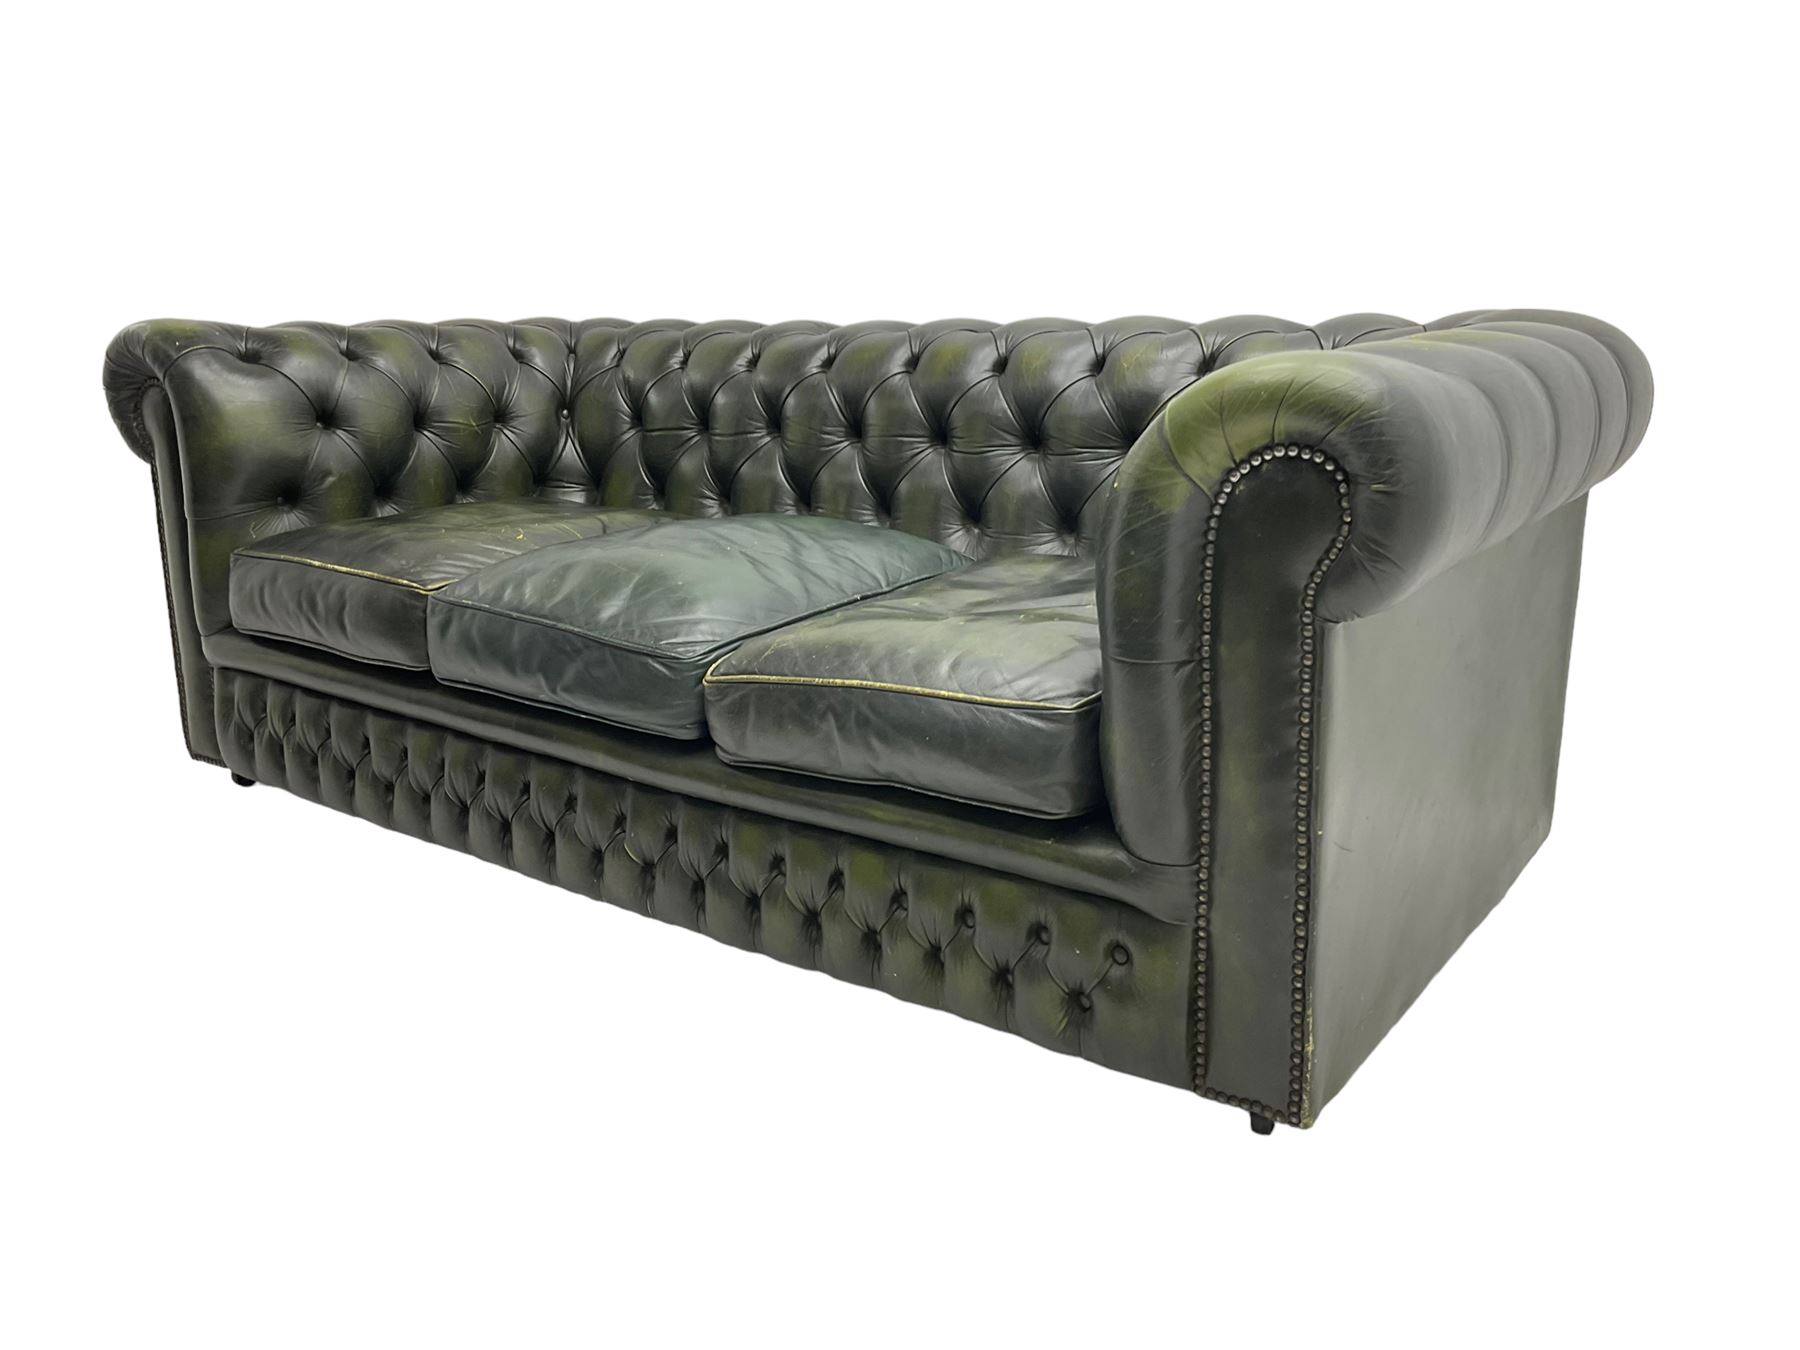 Chesterfield three seat sofa - Image 4 of 7